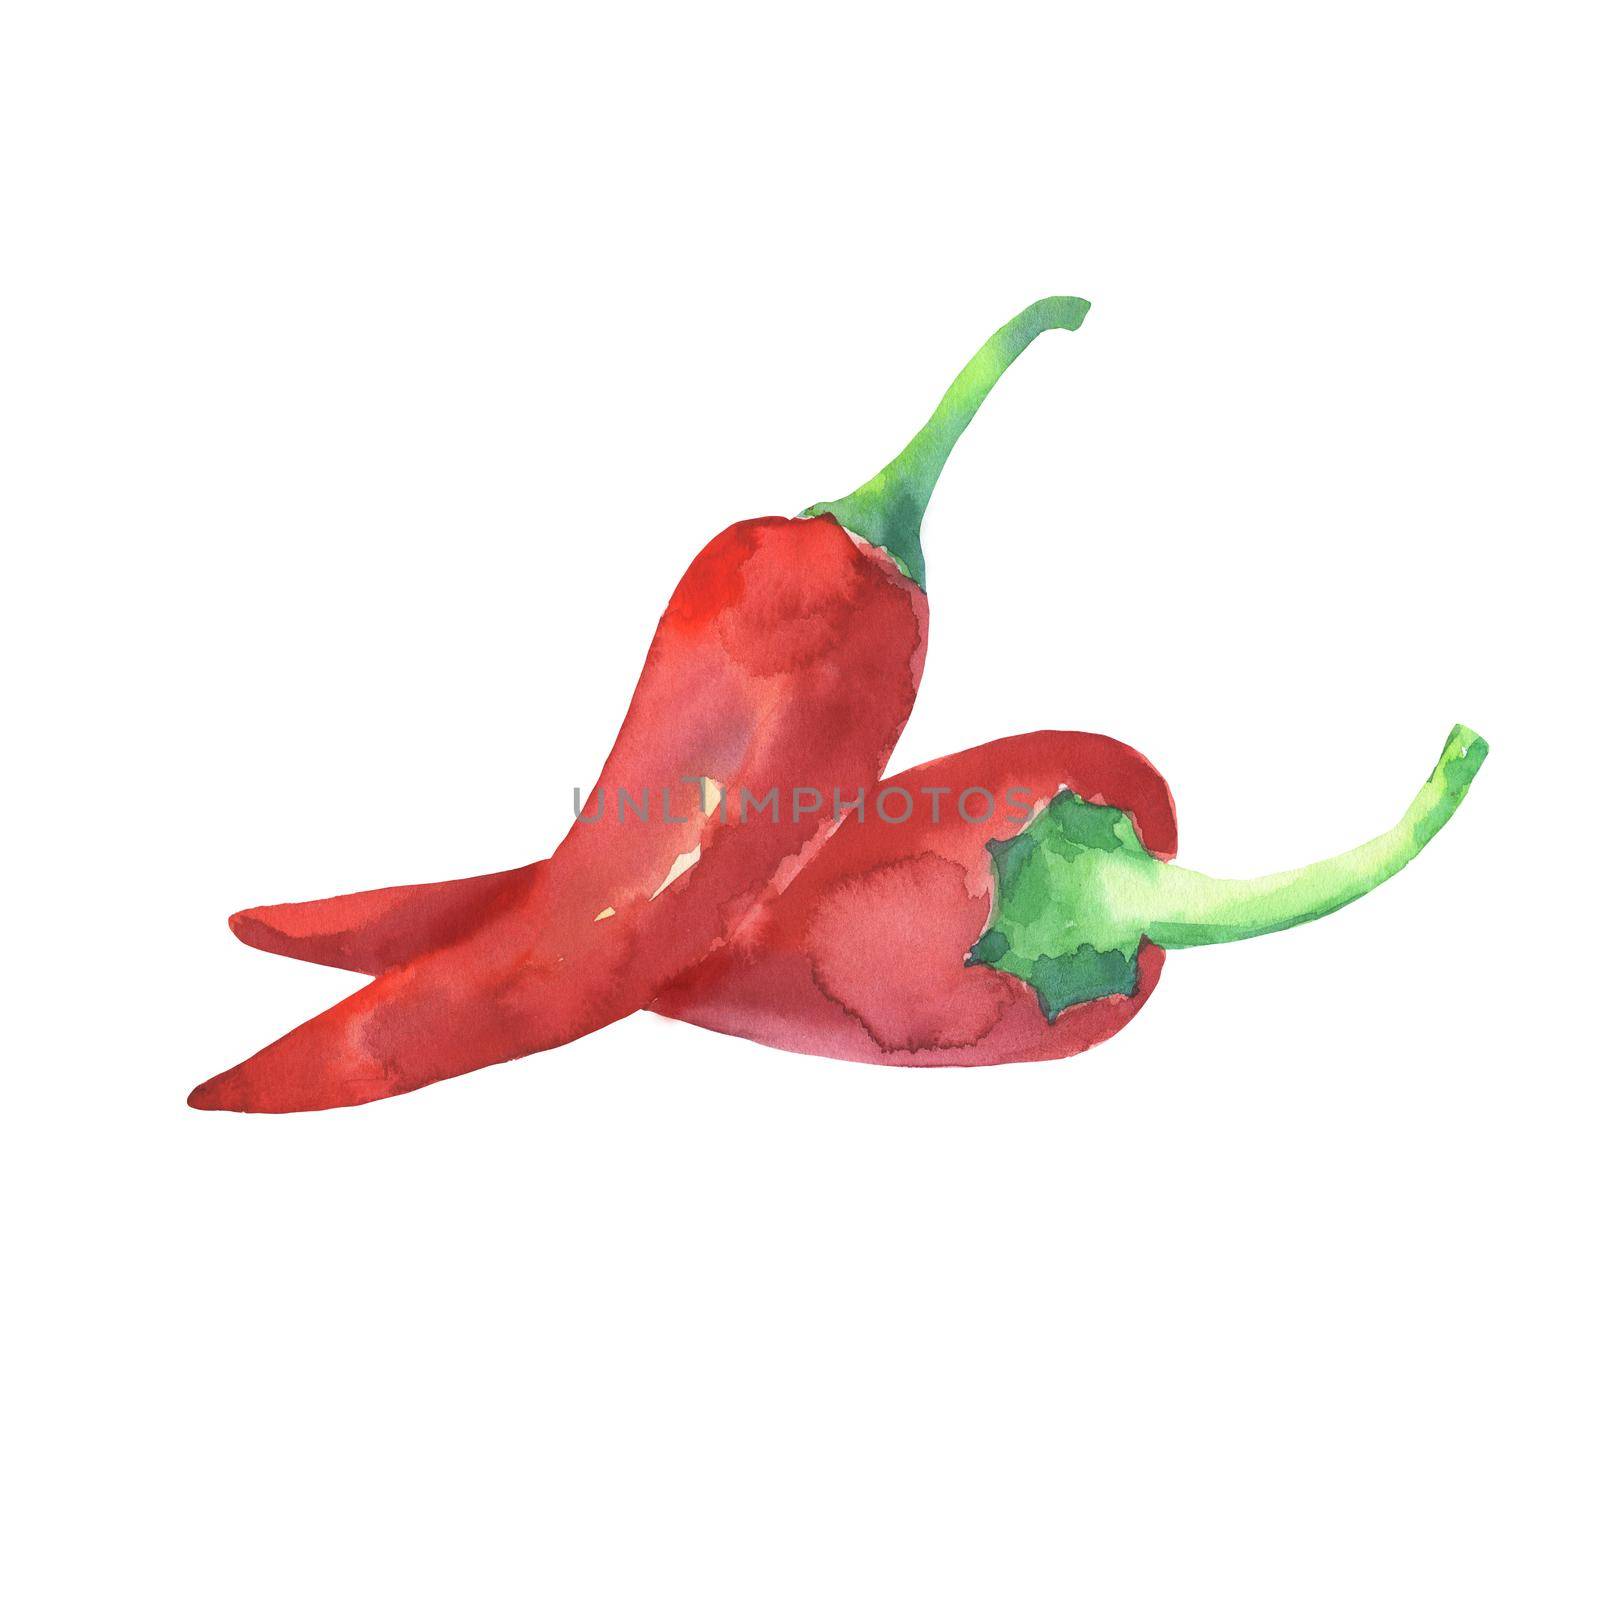 Red hot chili peppers. Hand drawing watercolor sketch isolated on white